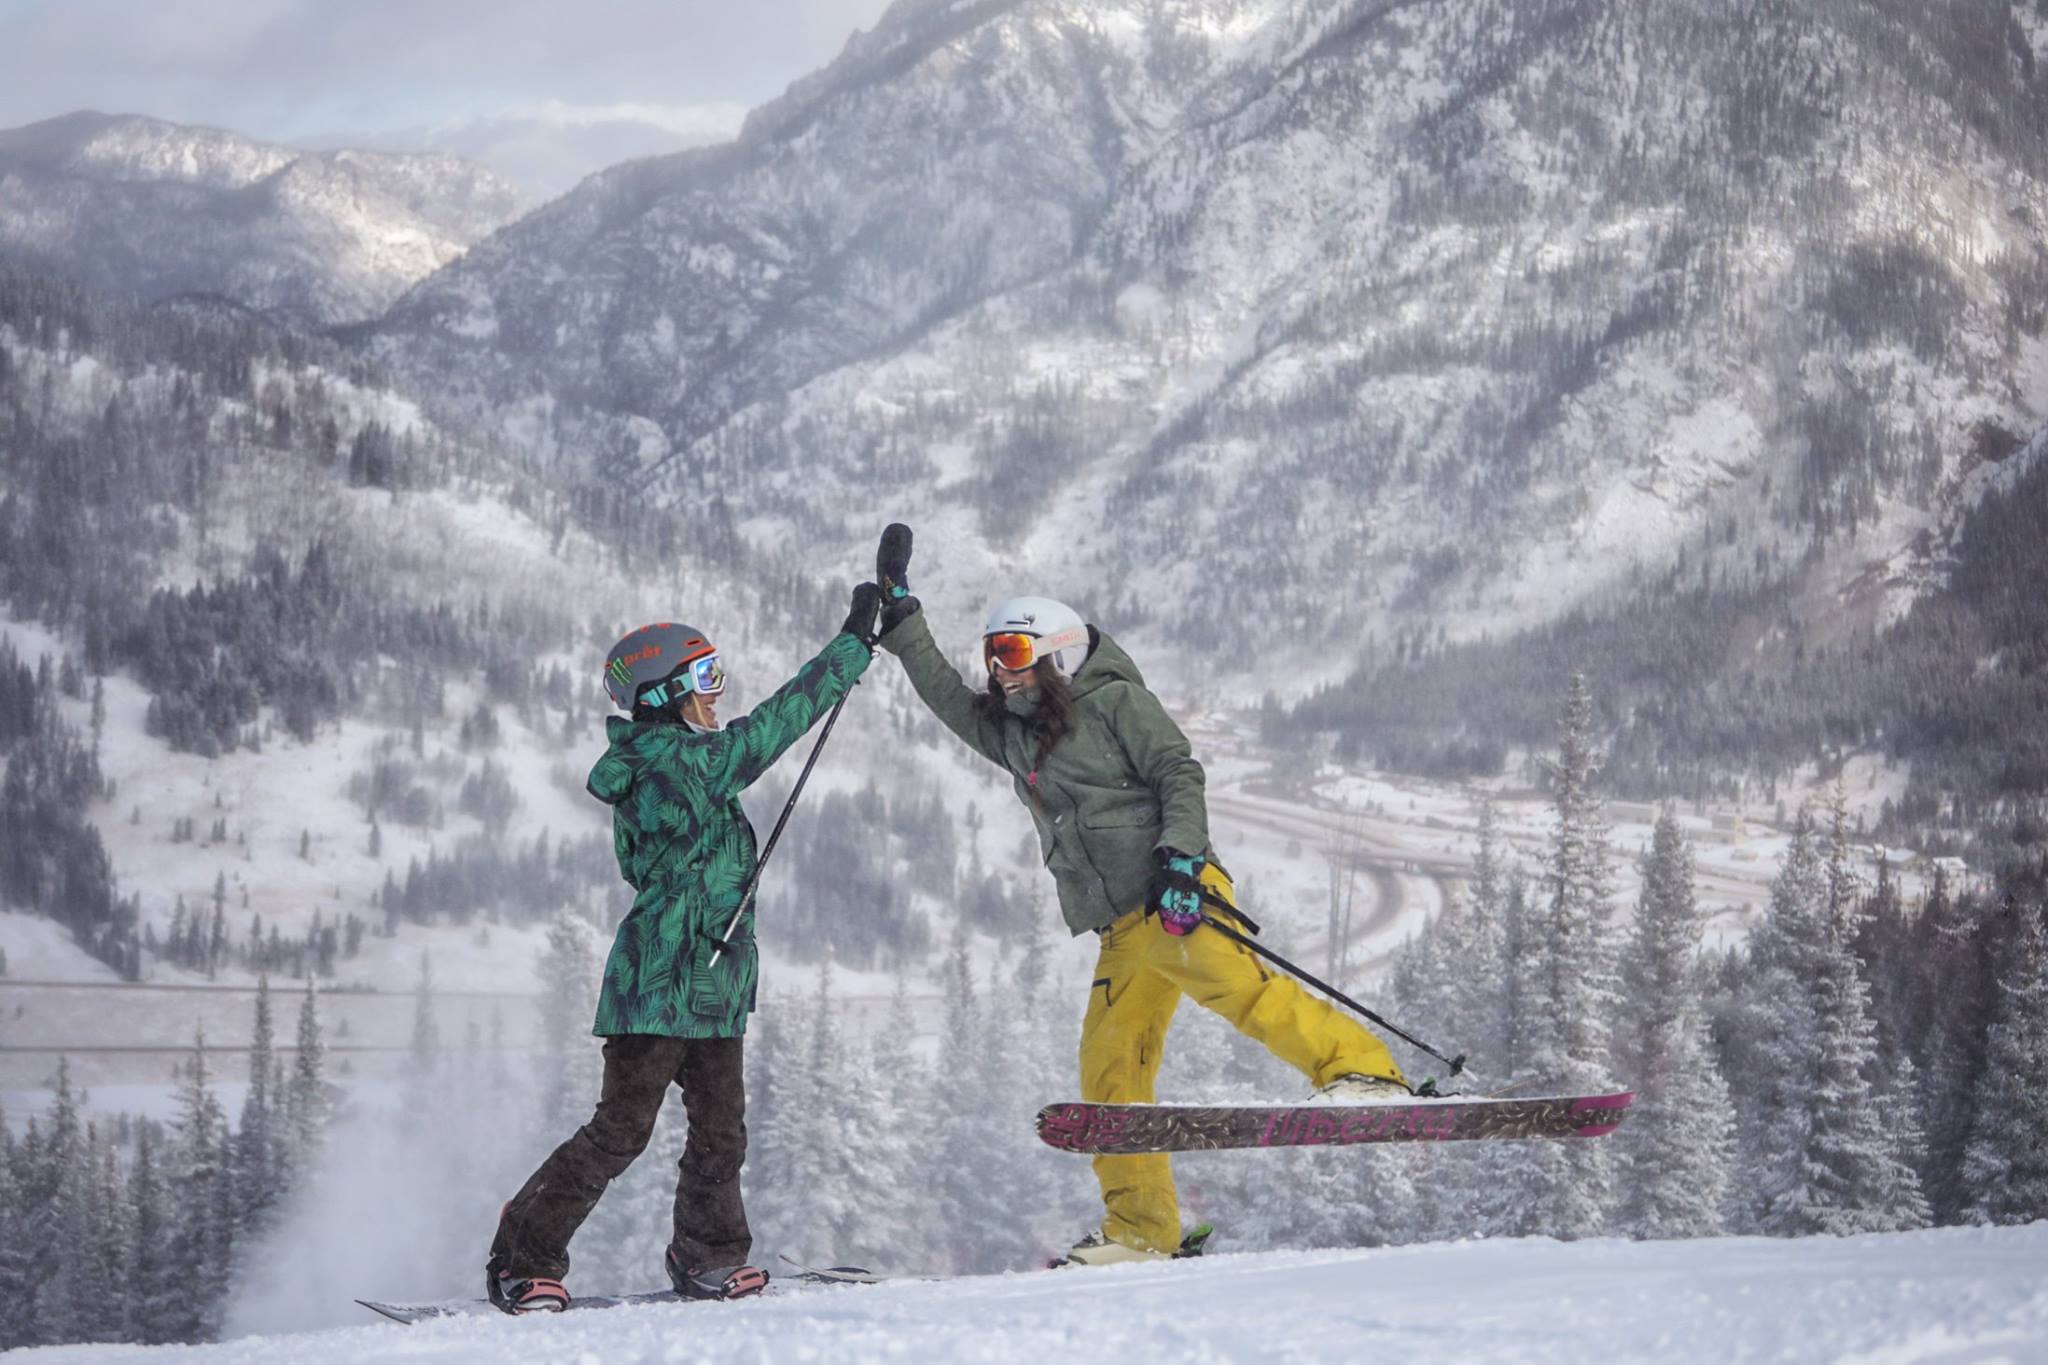 Copper Mountain Opening Day was full of Smiles and High-Fives! PC: Copper Mountain Facebook Page